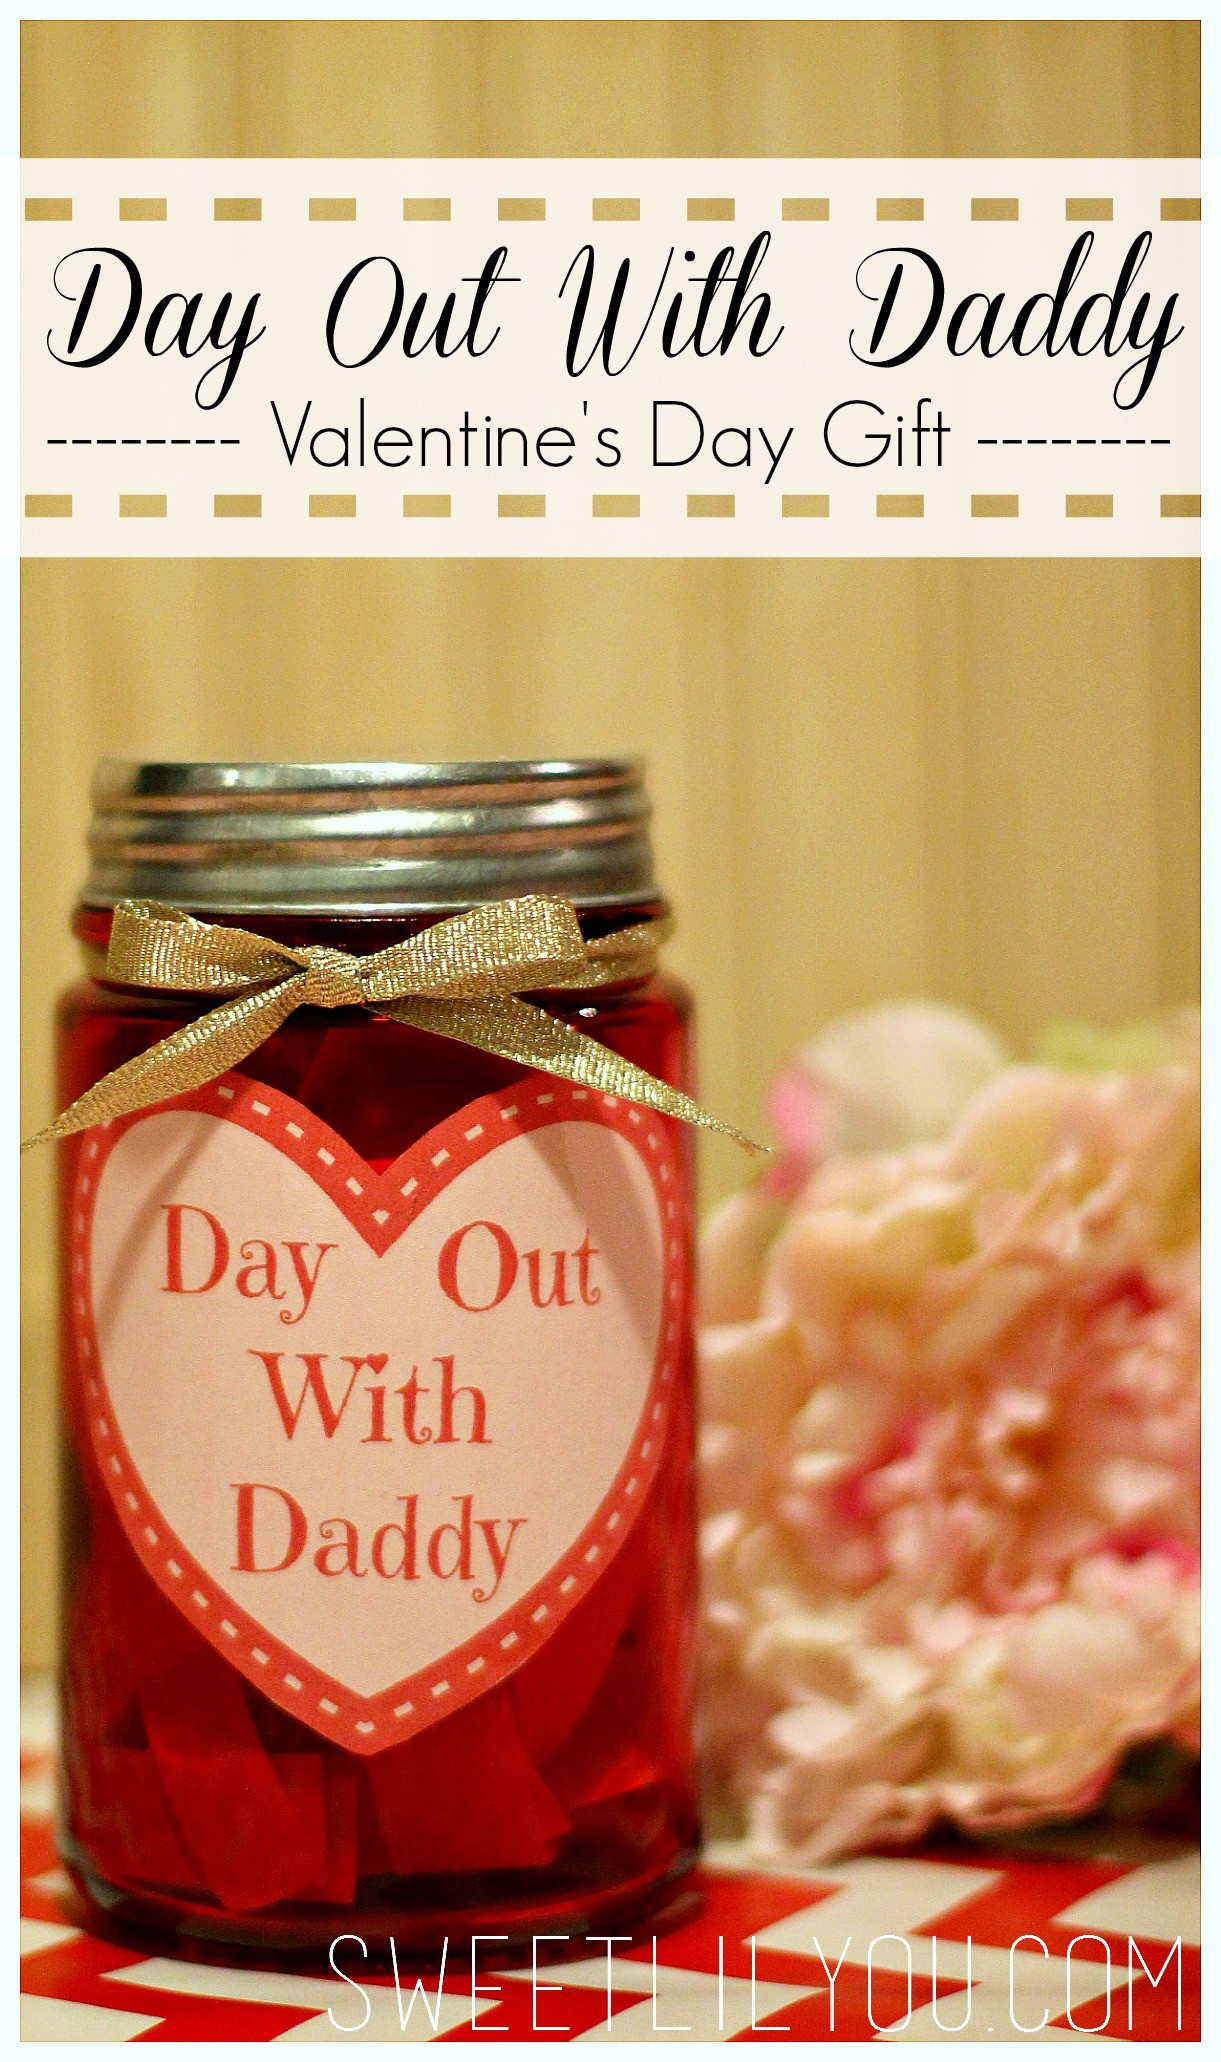 New Dad Valentines Day Gifts
 Day Out With Daddy Jar Valentine s Day Gift for Dad